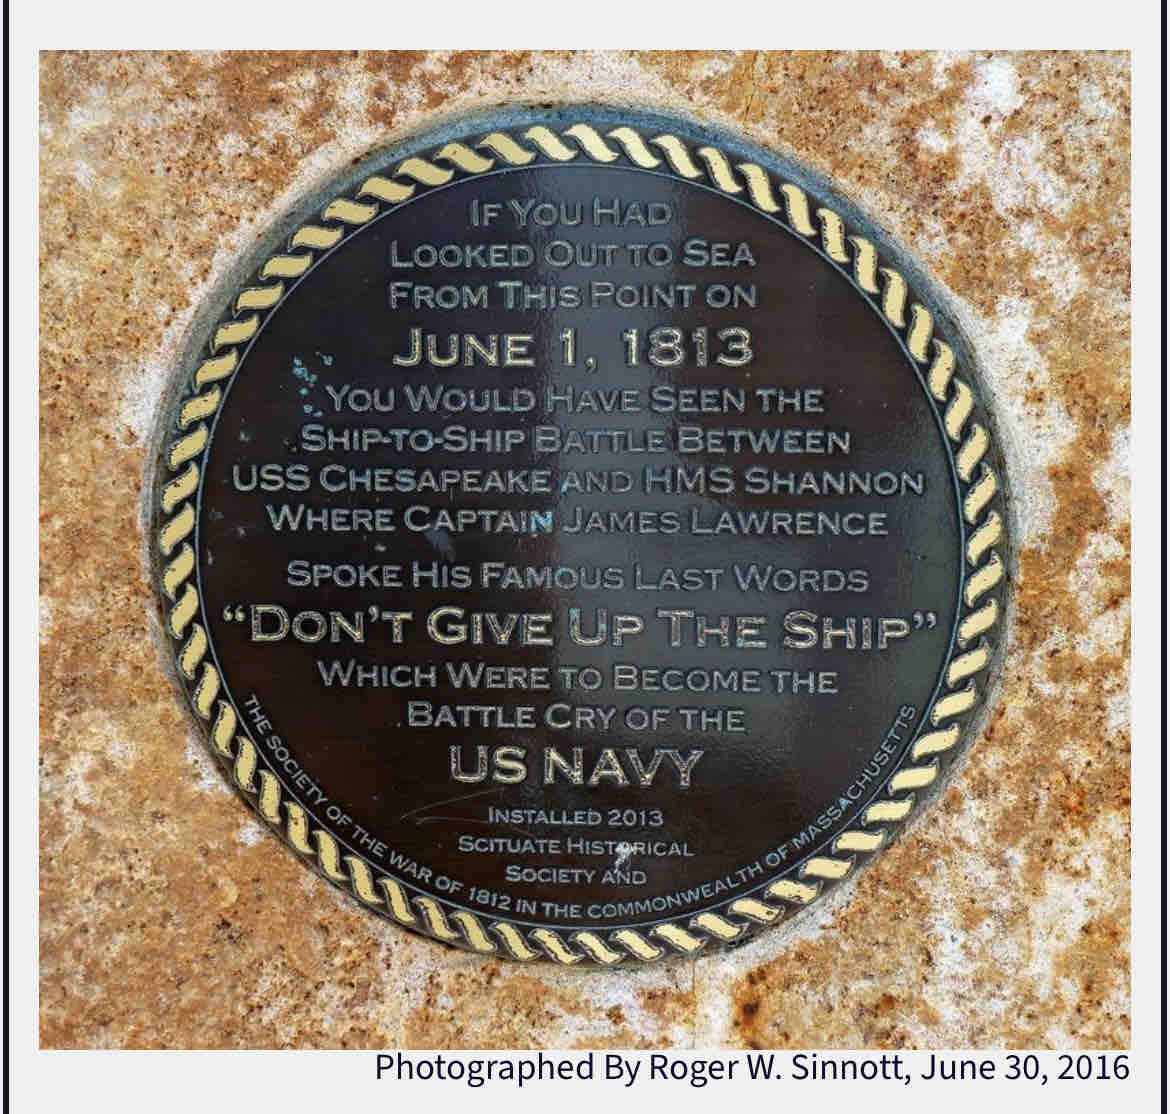 On June 1, 1813, the mortally wounded commander of the USS Chesapeake, Capt. James Lawrence, gave the order, “Don’t give up the ship” during a losing battle with the British frigate HMS Shannon in the War of 1812.  #todayinhistory